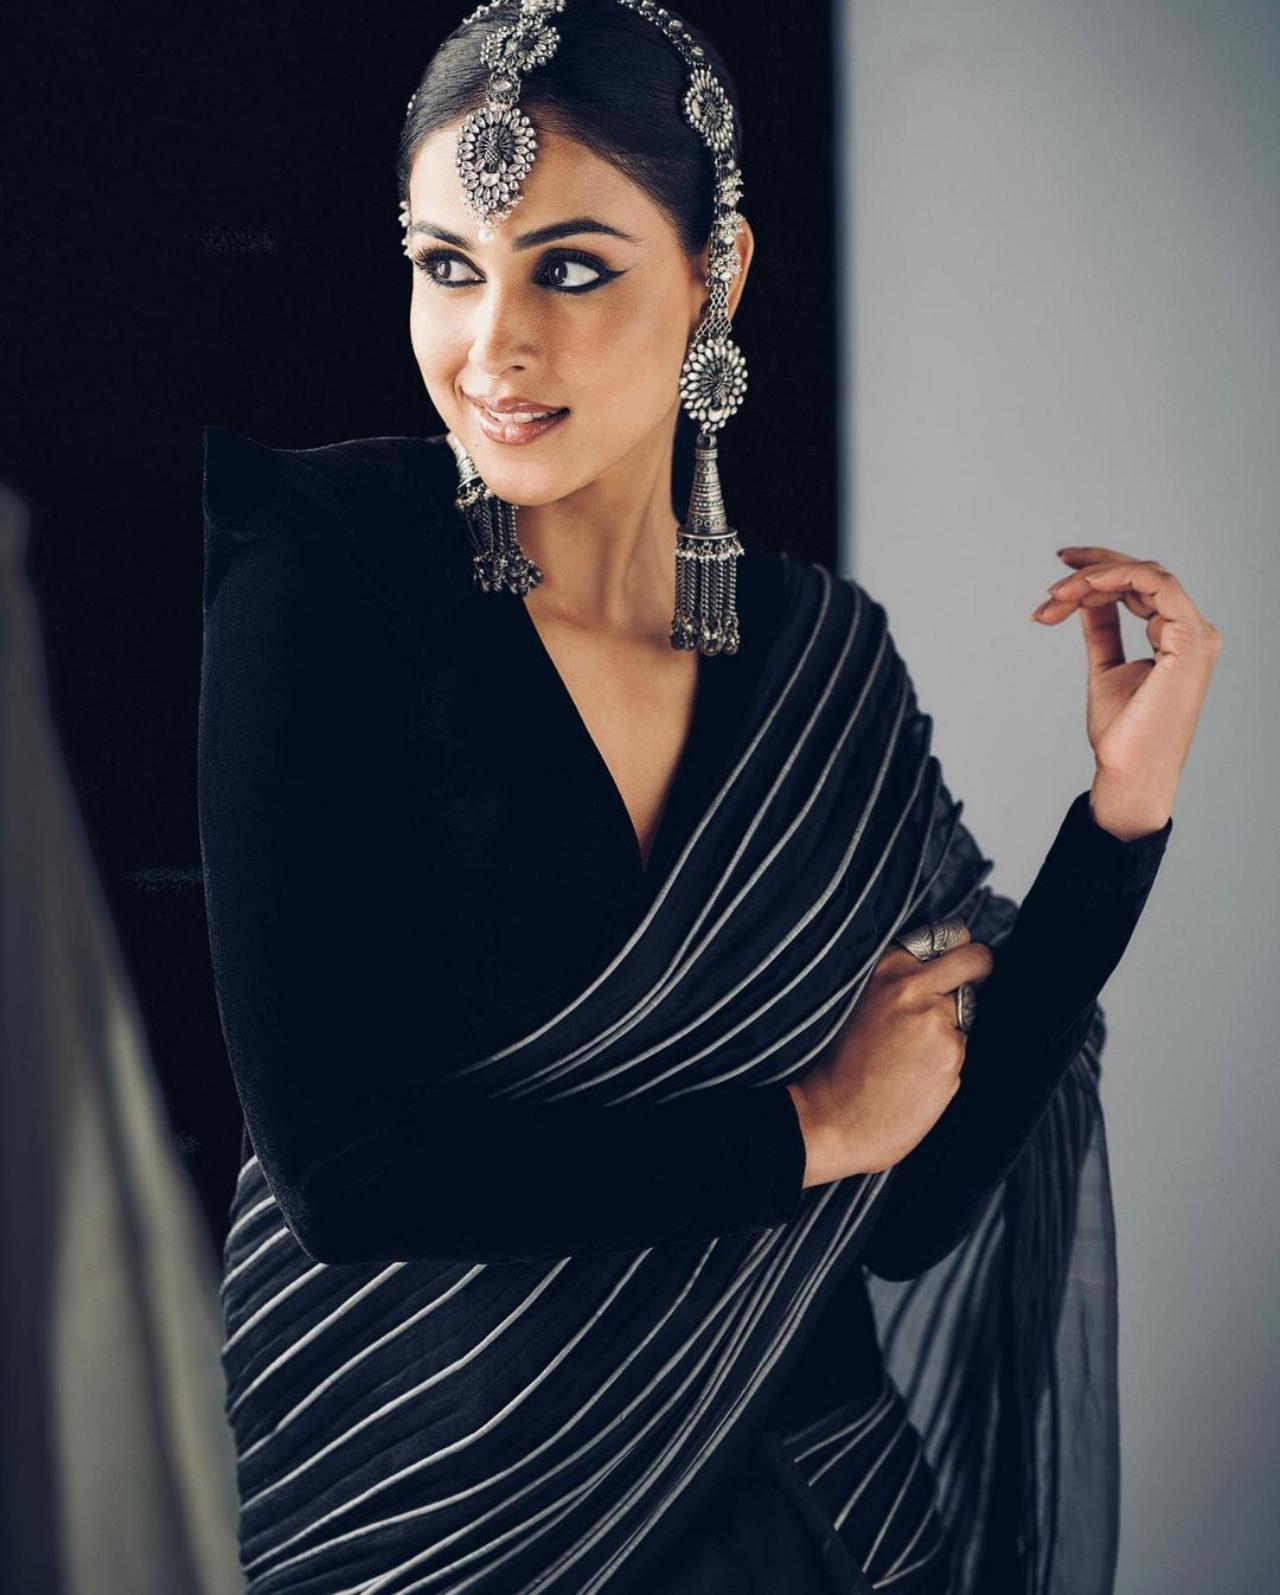 While her saree was a treat to watch, Genelia teamed up her look with some timeless oxidised jewllery and a bold eyeliner.